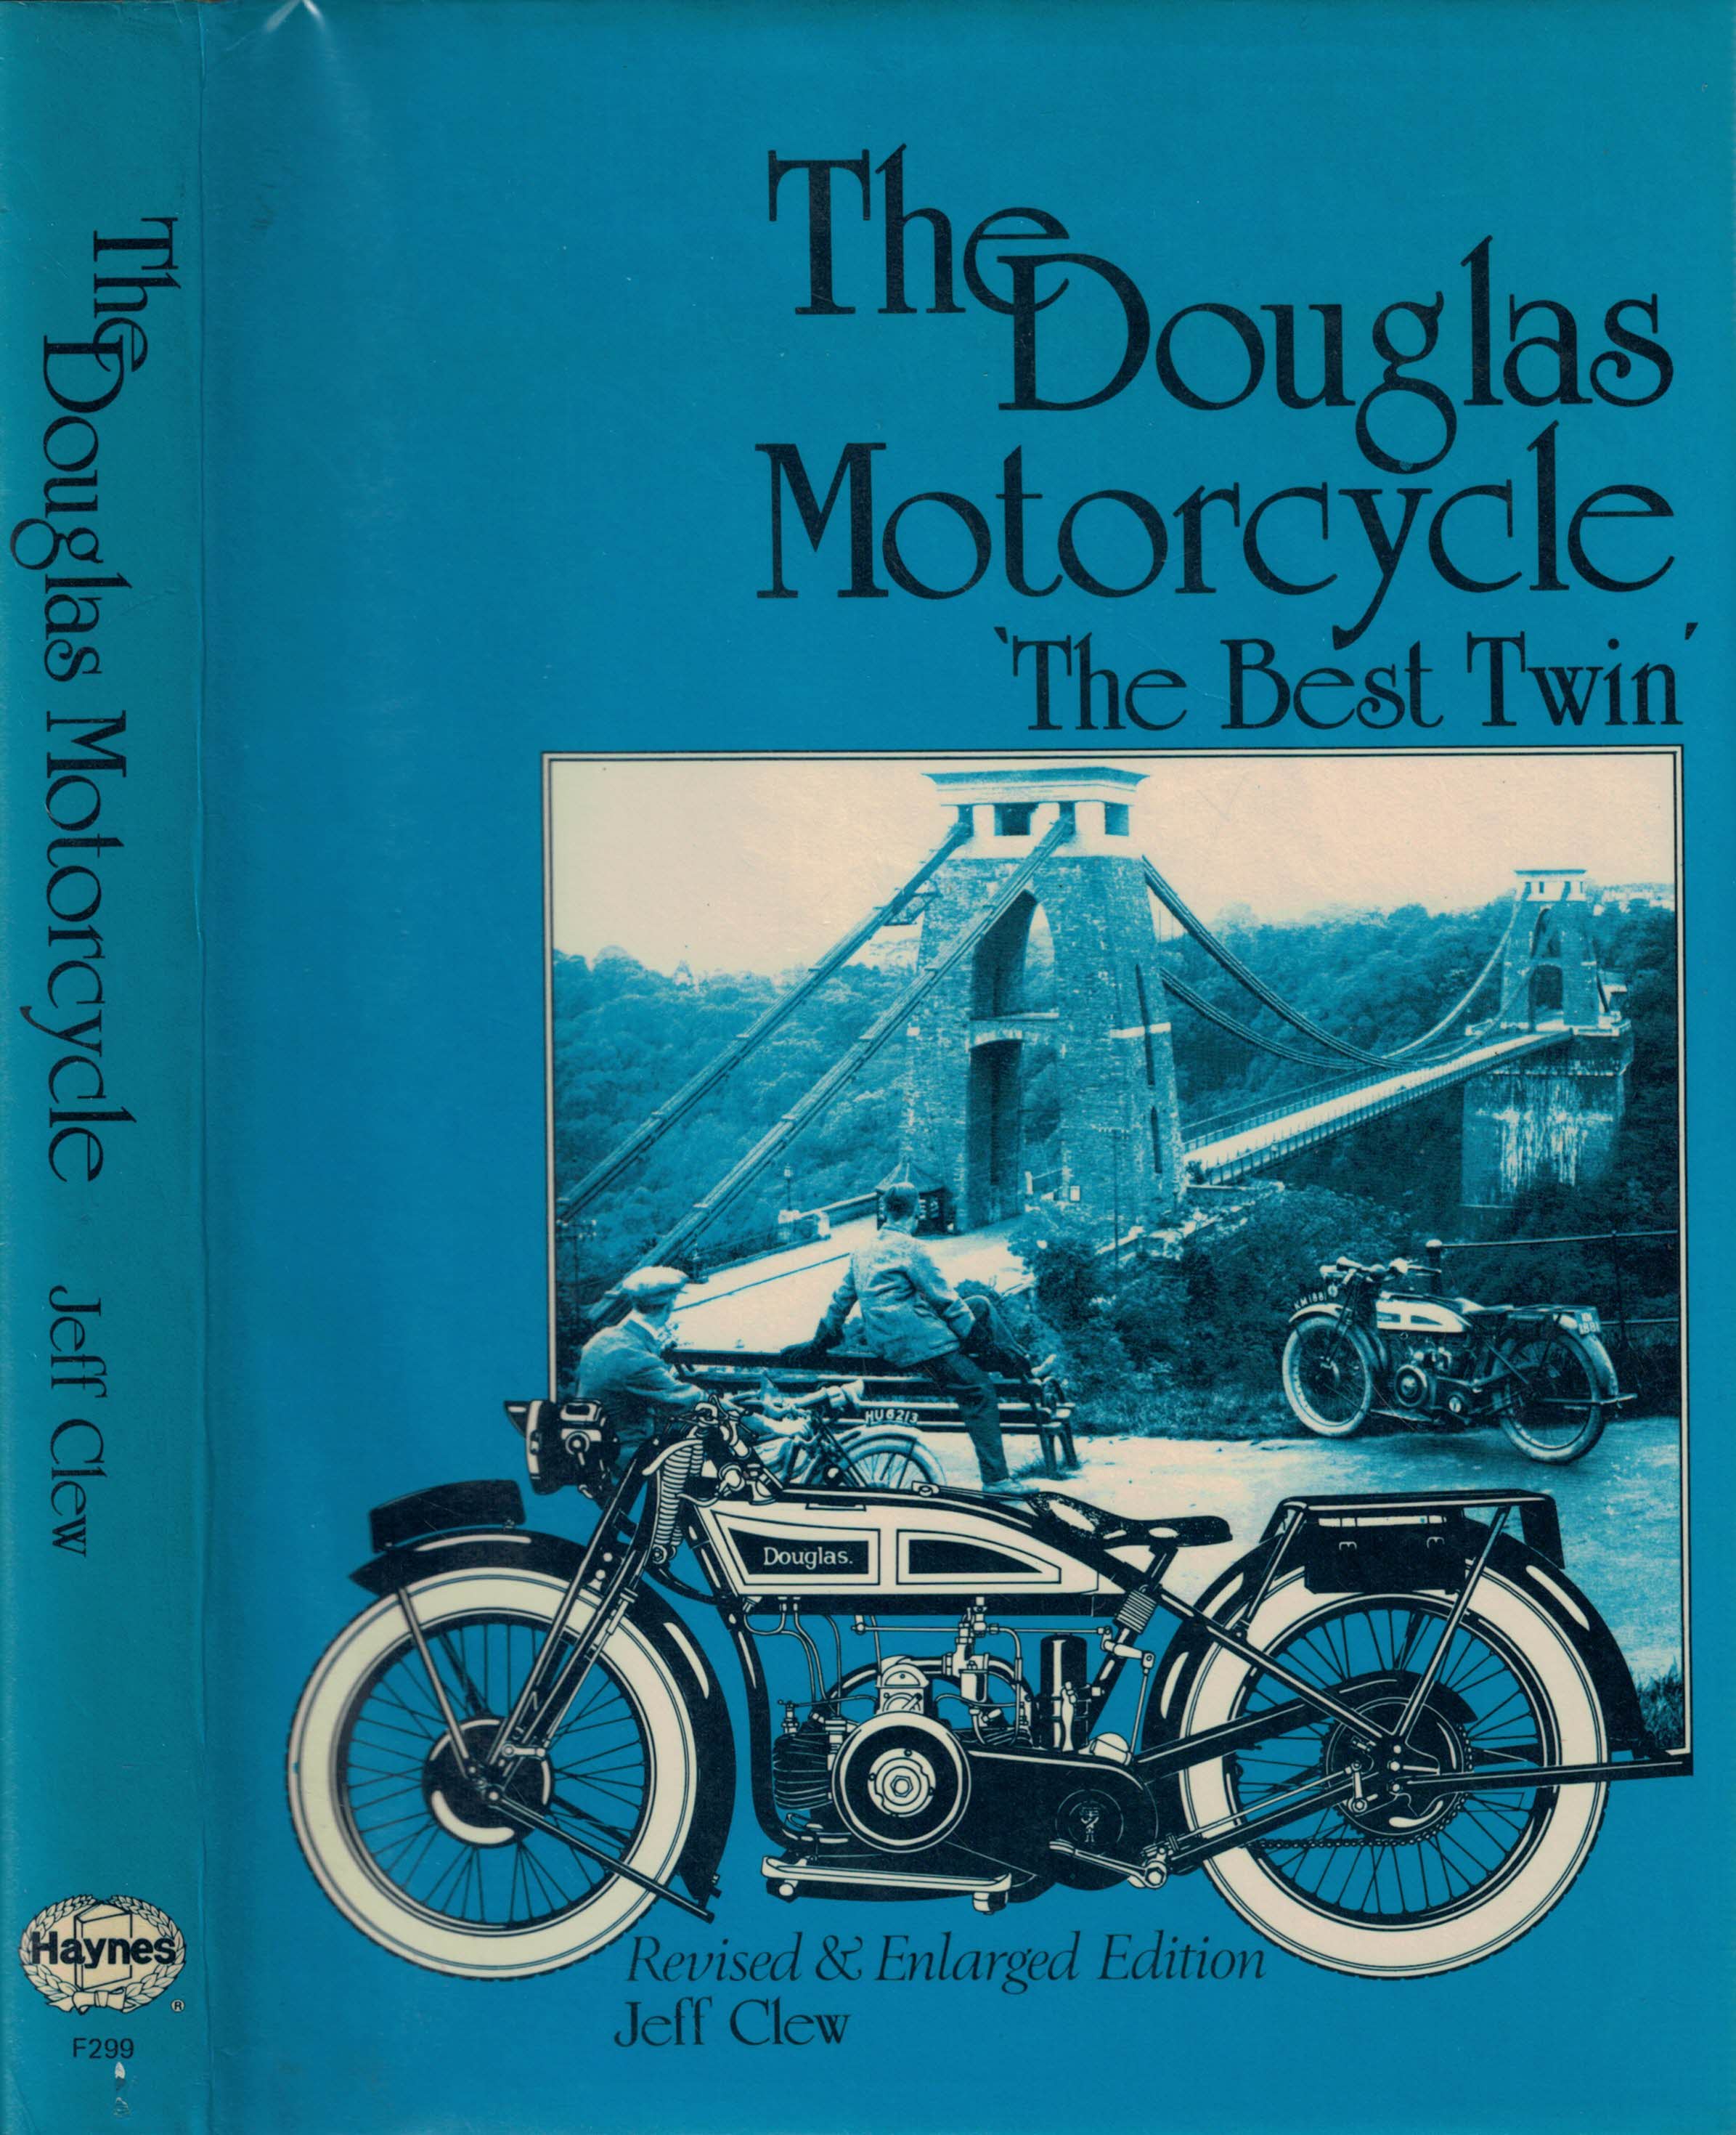 The Douglas Motorcycle: 'The Best Twin'.